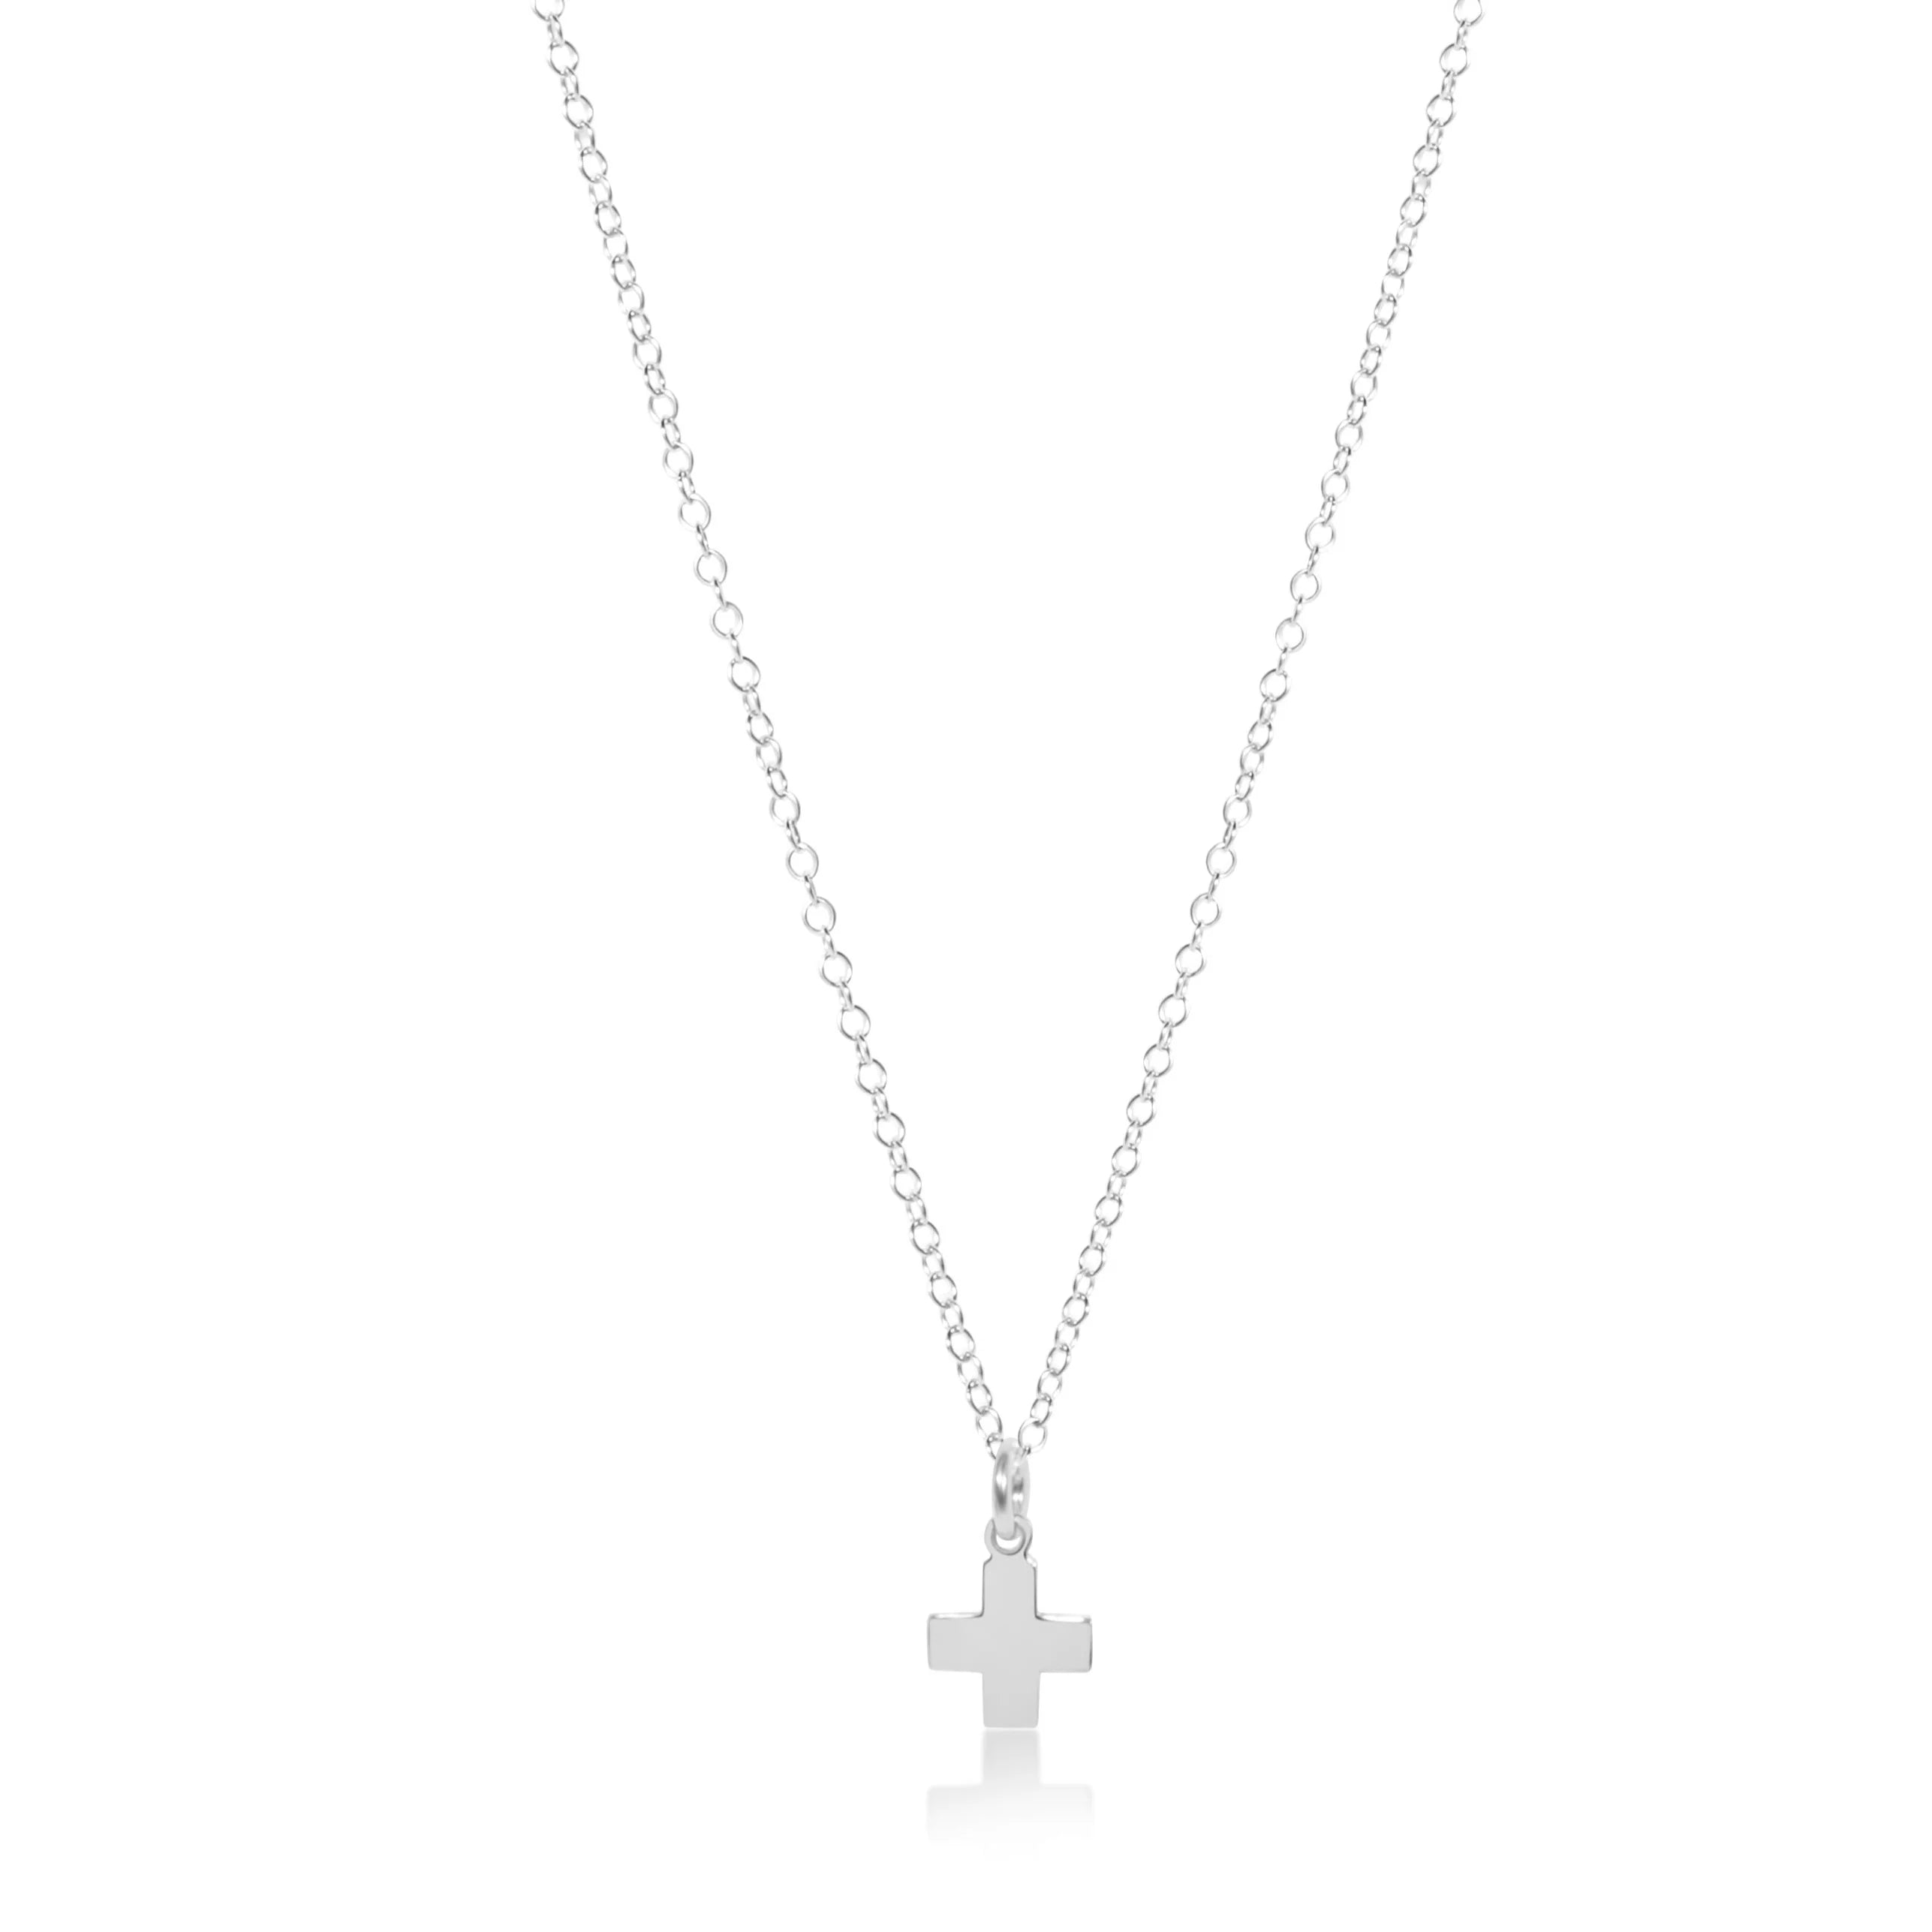 Sterling Silver Cross on Silver Chain Necklace